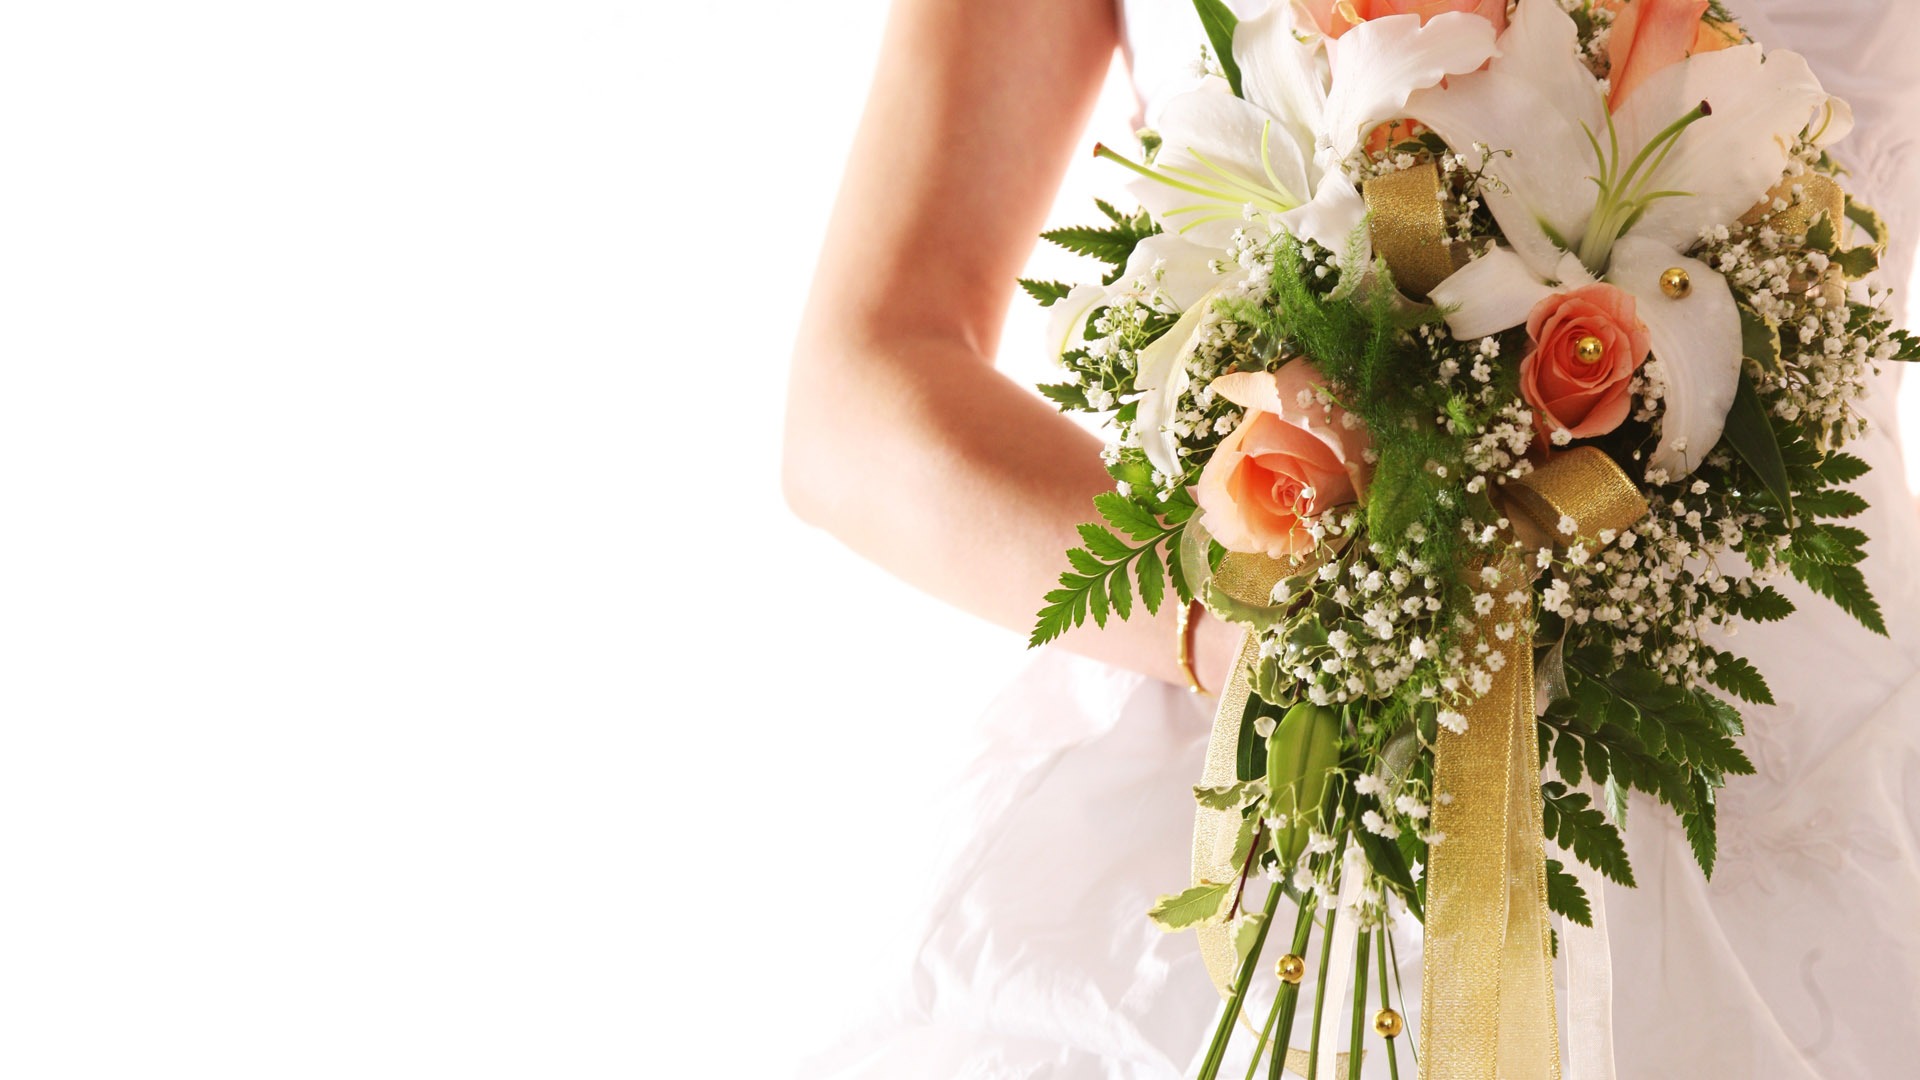 Weddings and Flowers wallpaper (1) #12 - 1920x1080